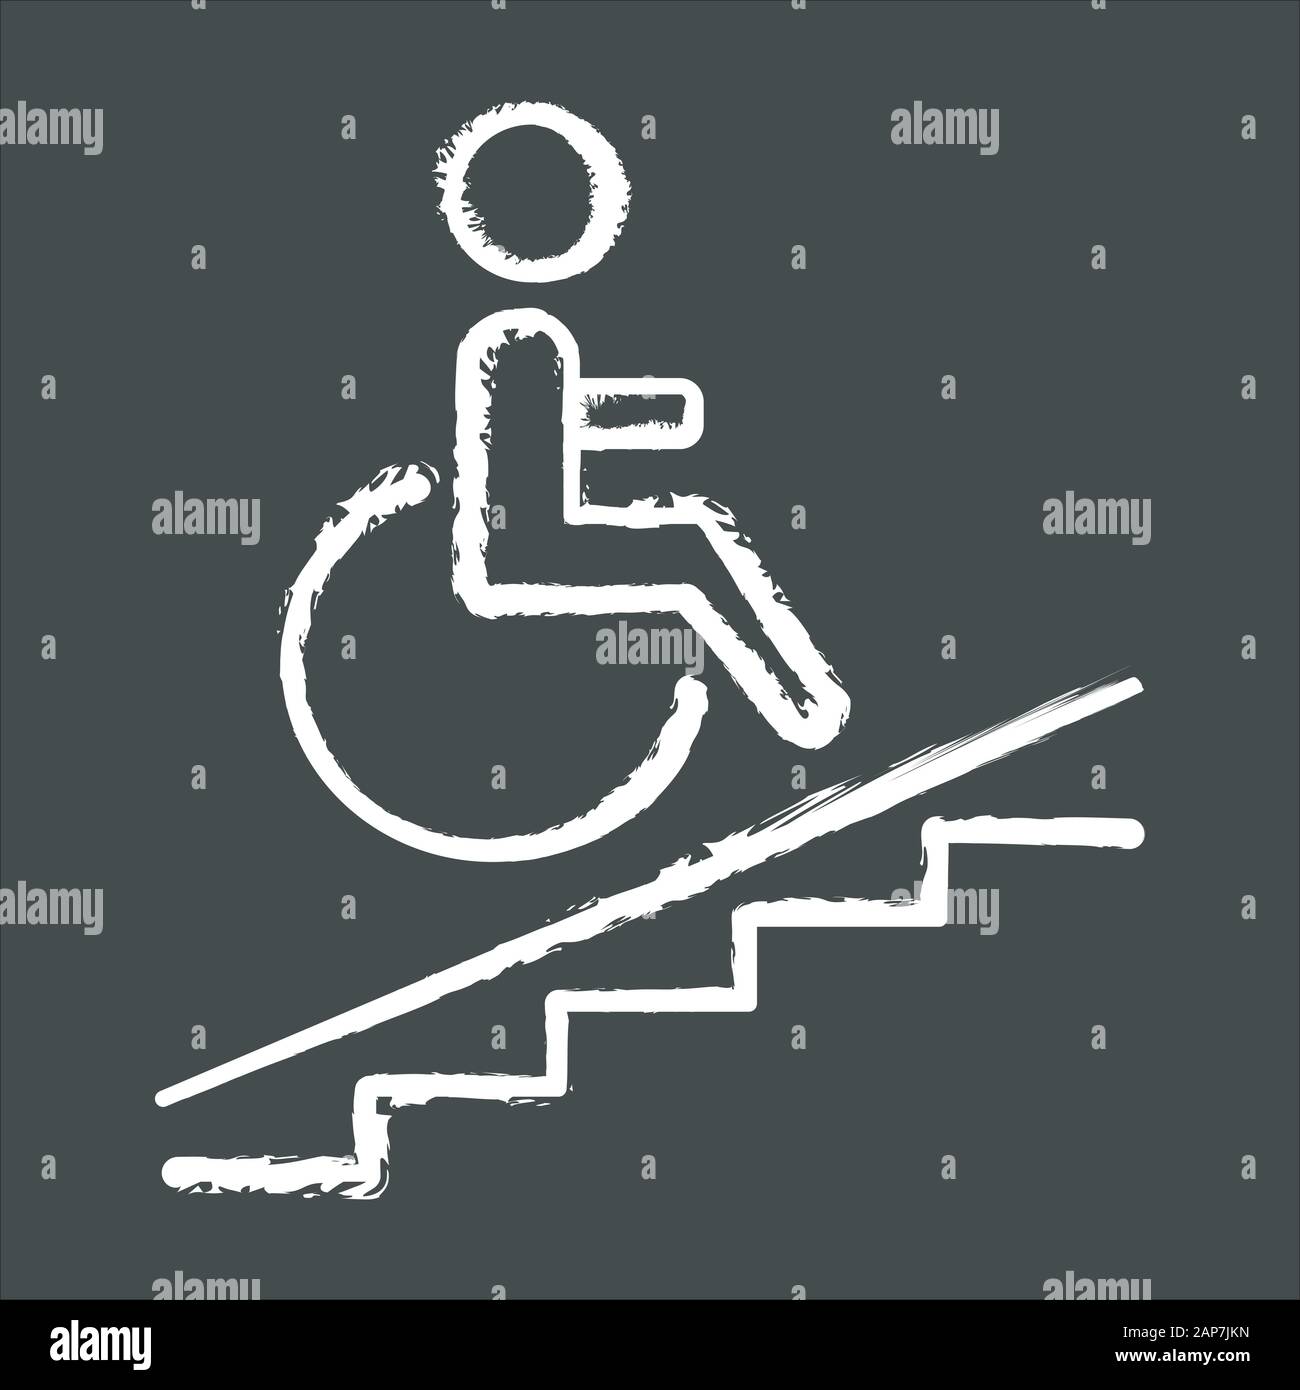 Wheelchair access chalk icon. Accessible to handicap people. Facilities for disabled persons. Wheelchair ramp sign. Apartment amenities. Architectural Stock Vector